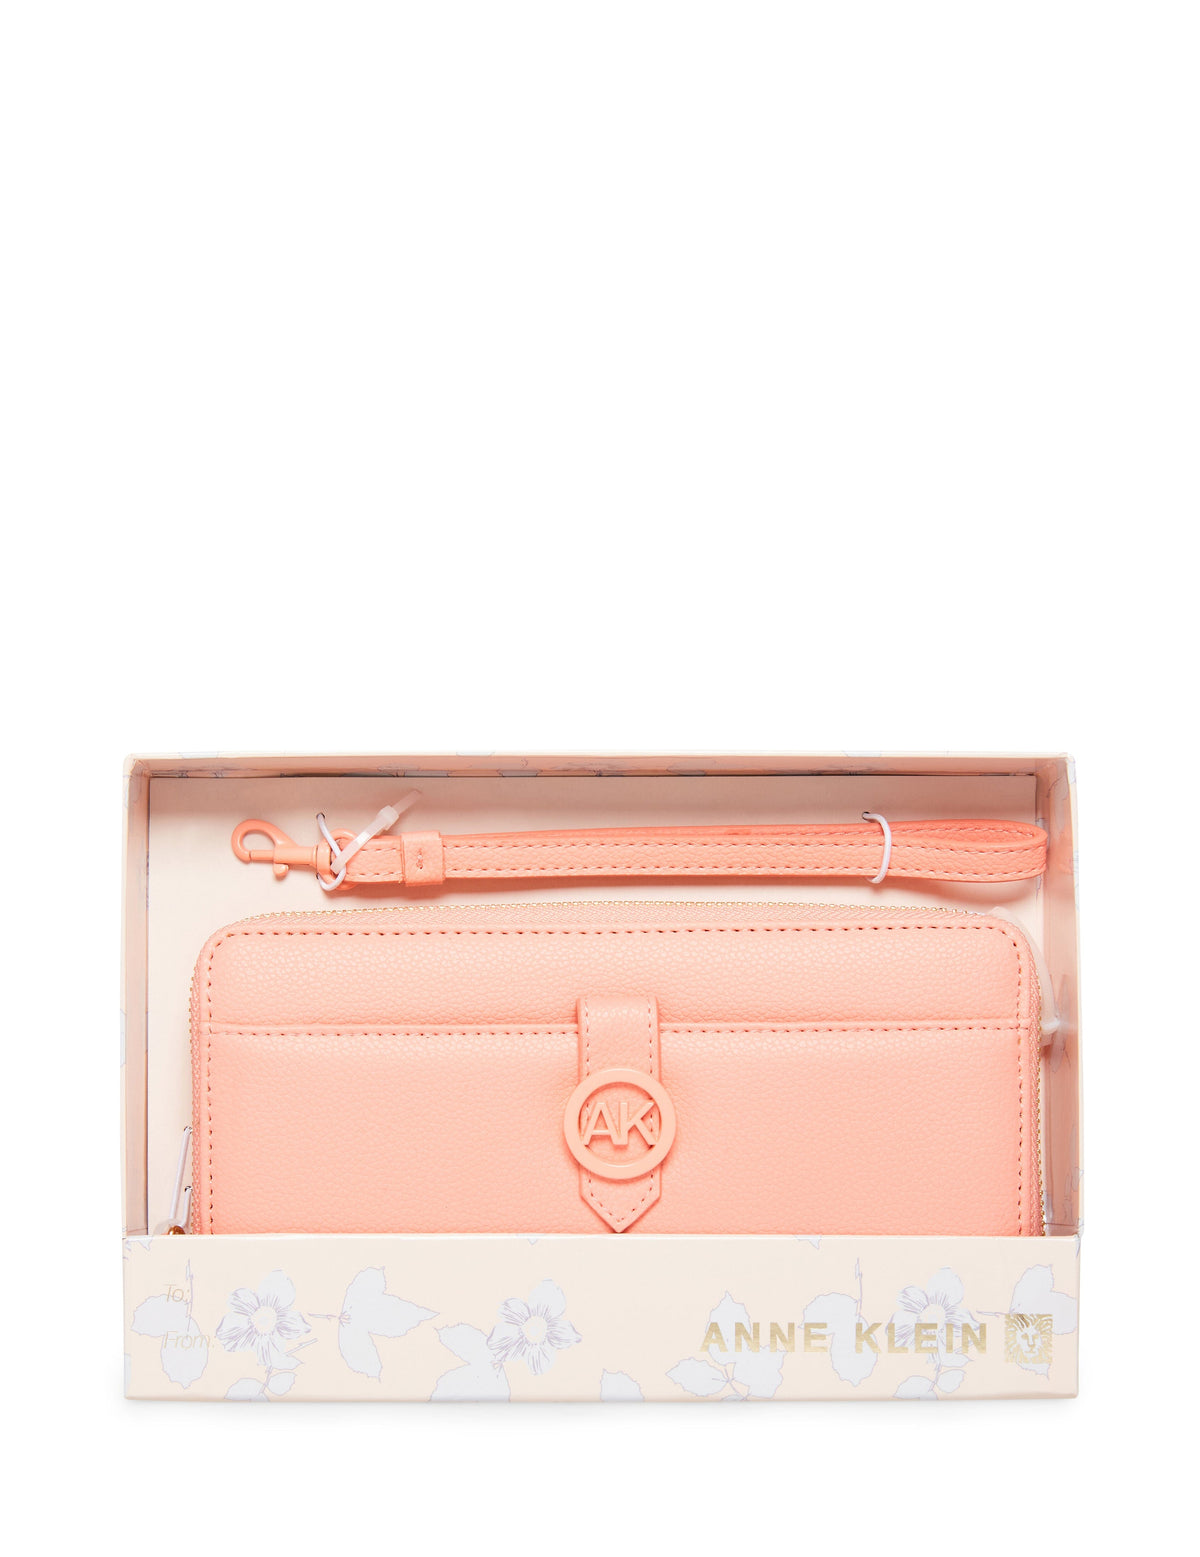 Anne Klein Coral pink Boxed Slim Zip Wallet With AK Coated Hardware &amp; Detachable Wristlet